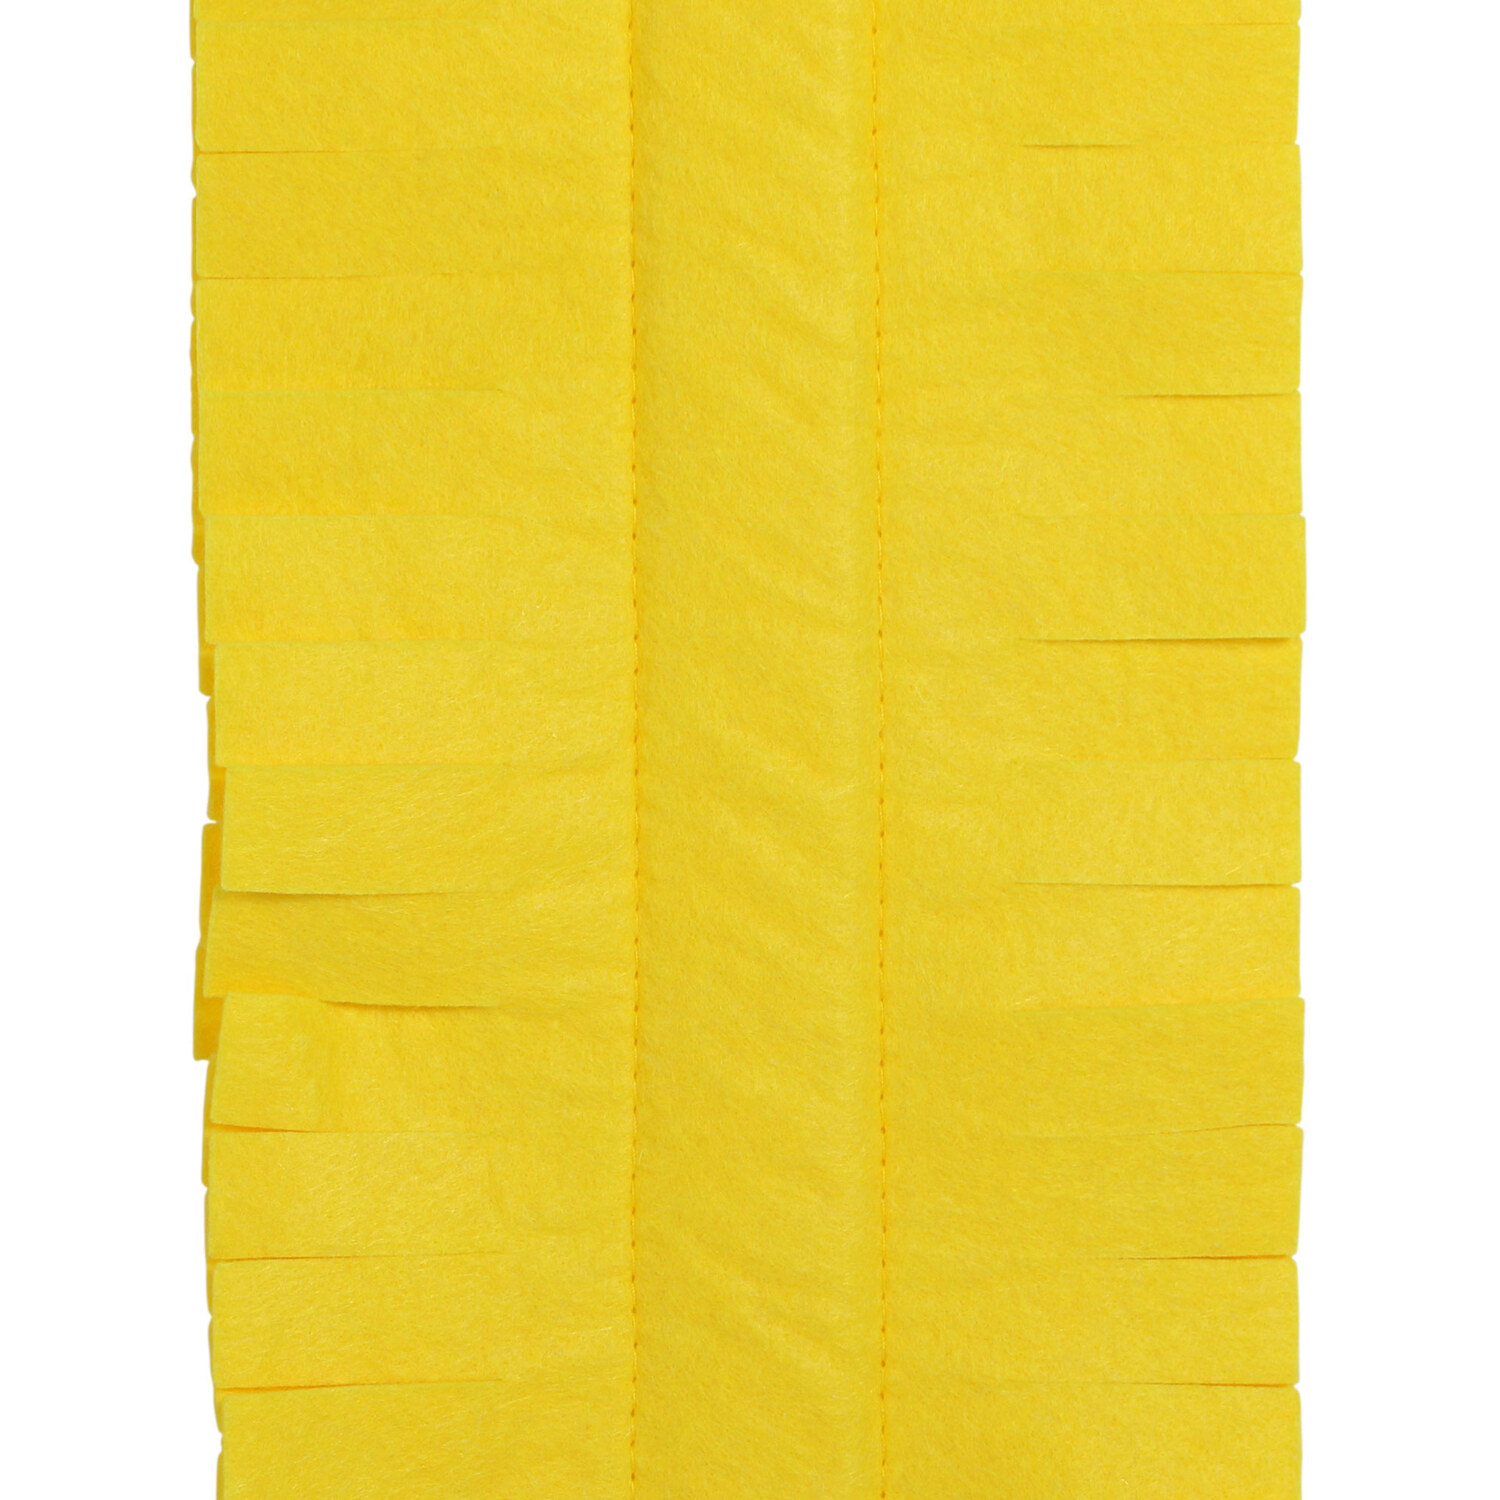 My Home Flexible Cleaning Duster - Yellow Image 4